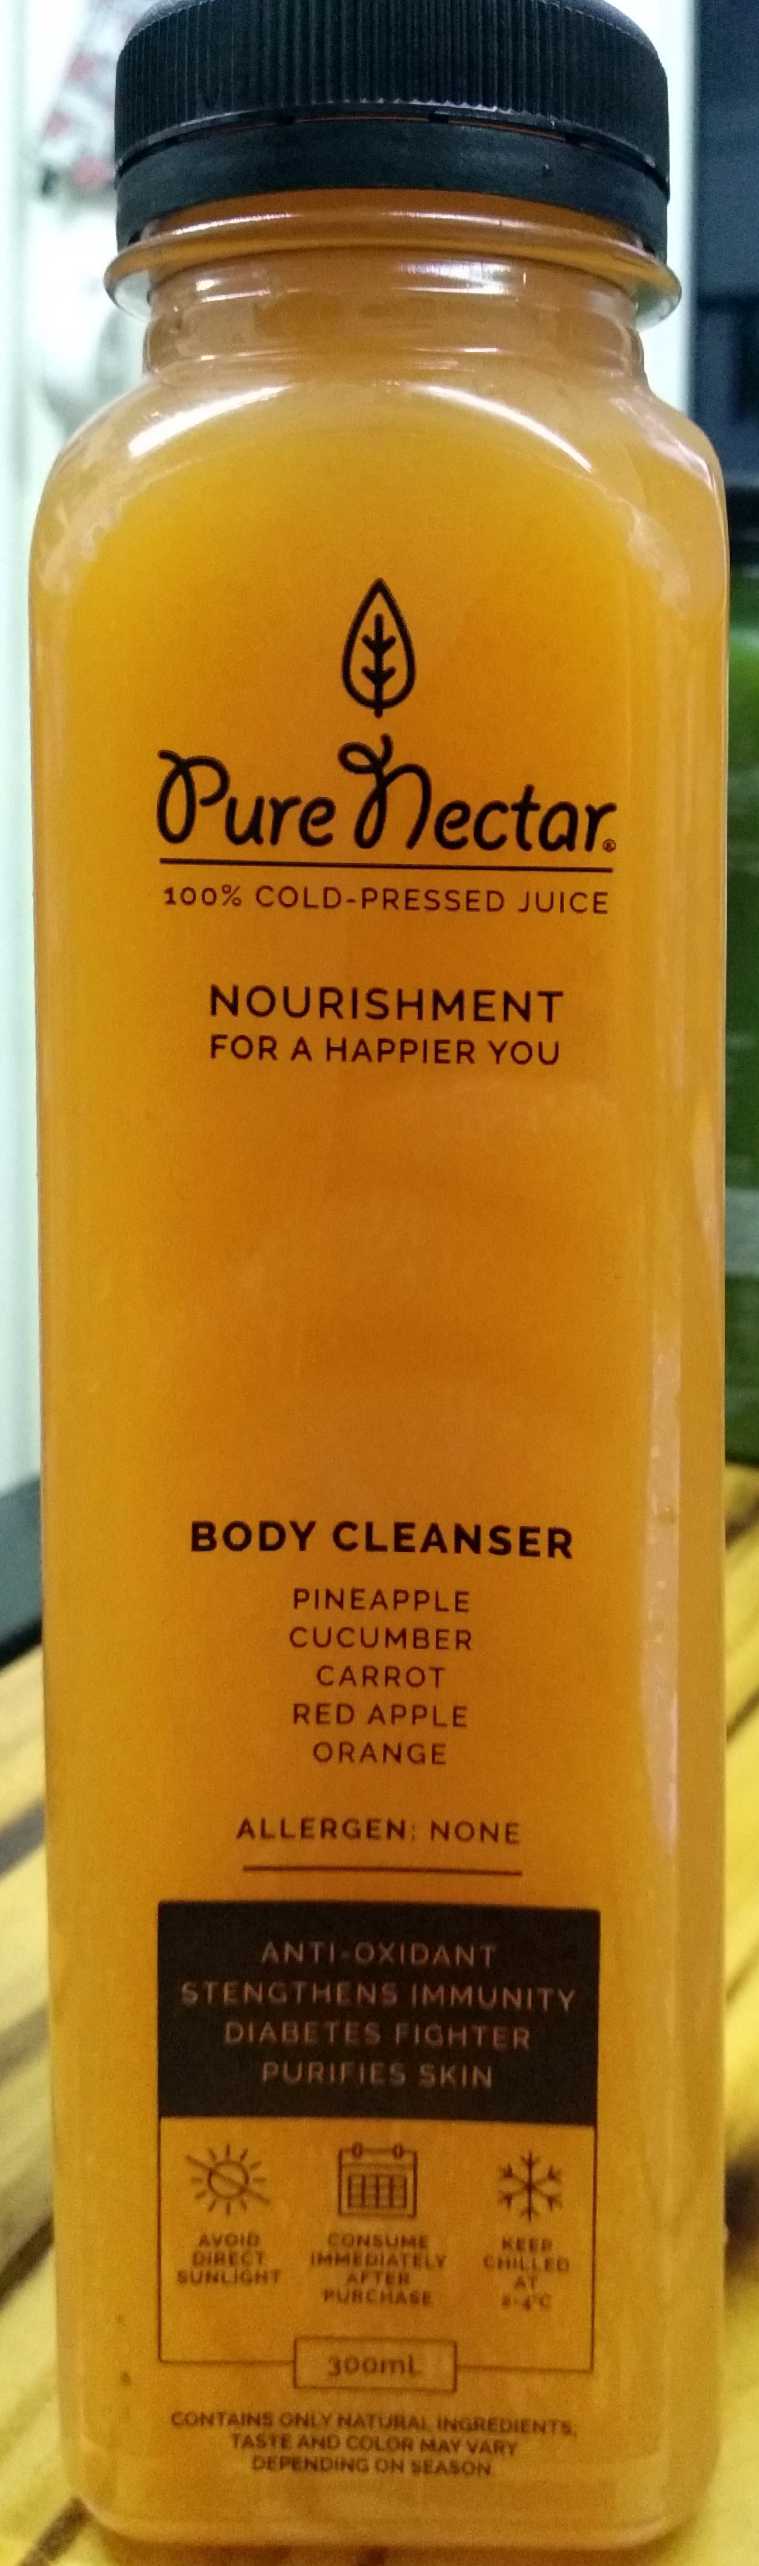 Pure Nectar Body Cleanser